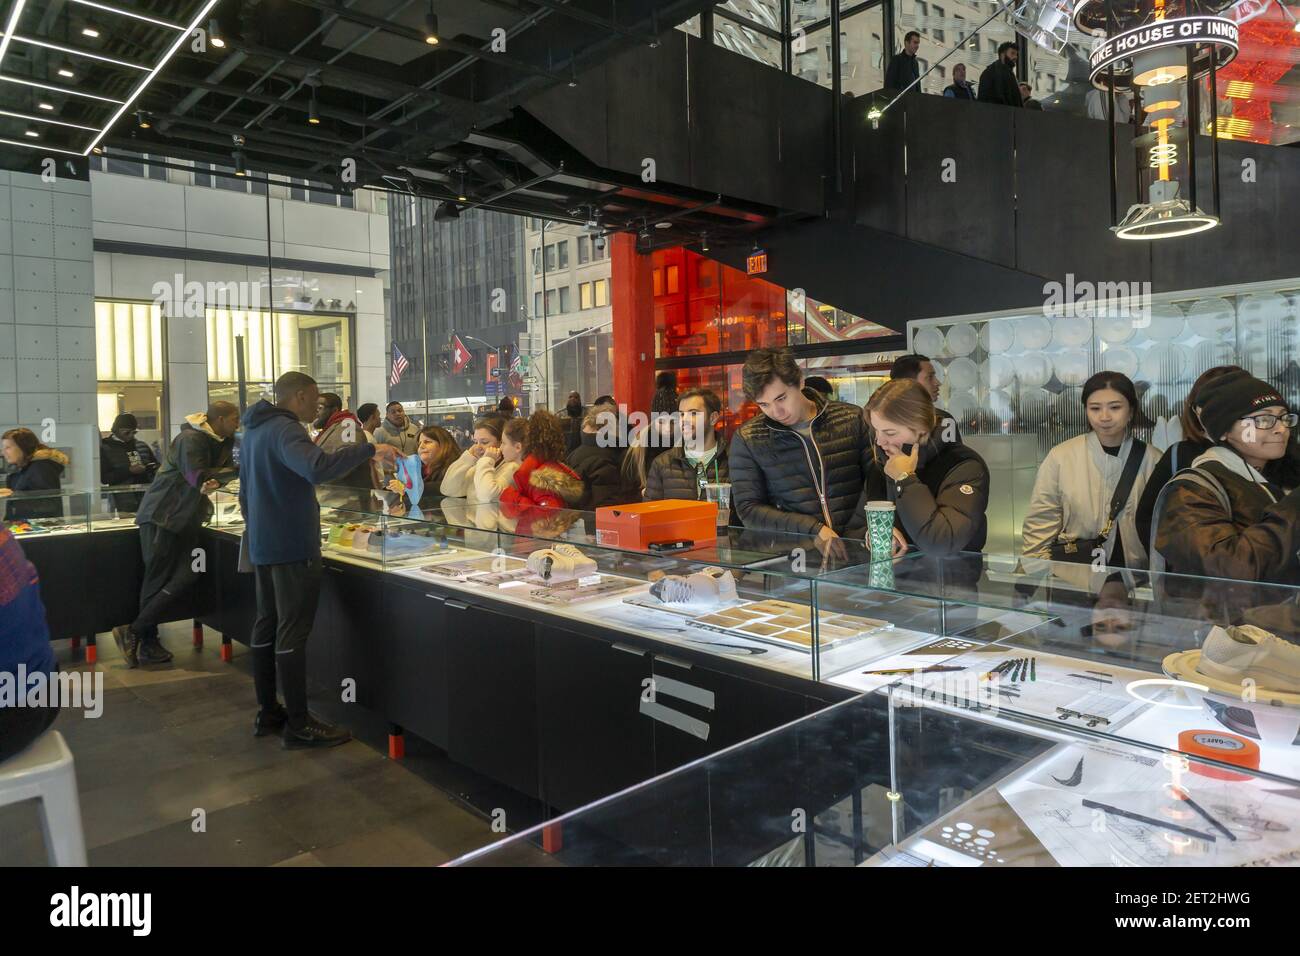 Customization options are discussed at the counter in the newly opened Nike  flagship store on Fifth avenue in New York on Saturday, November 17, 2018.  The 69,000 square foot store, dubbed the "